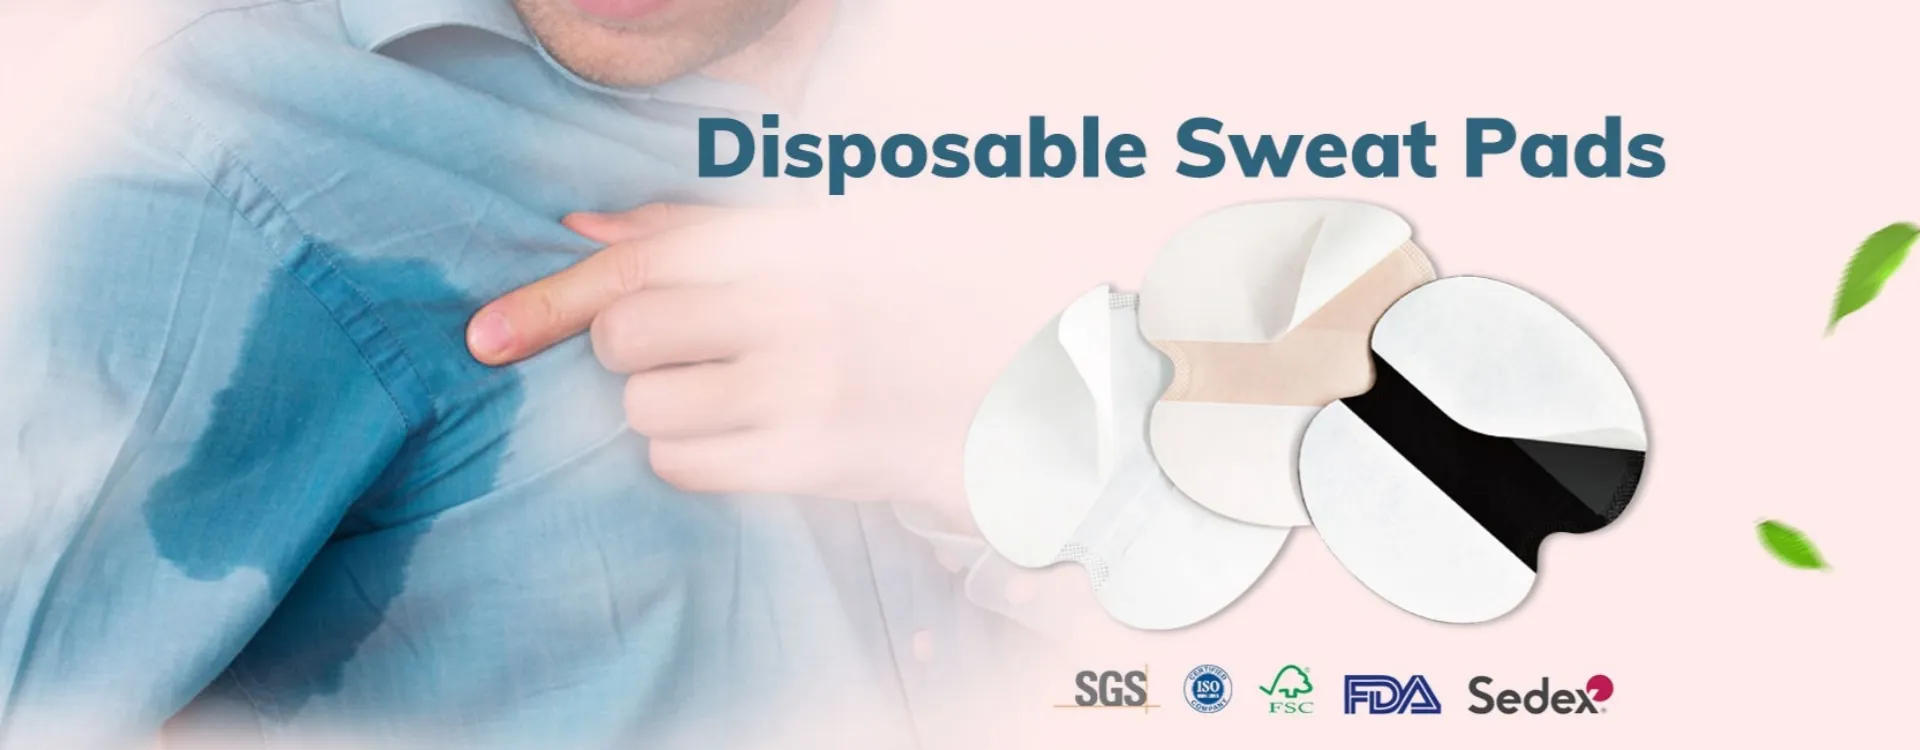 Disposable Sweat Pads